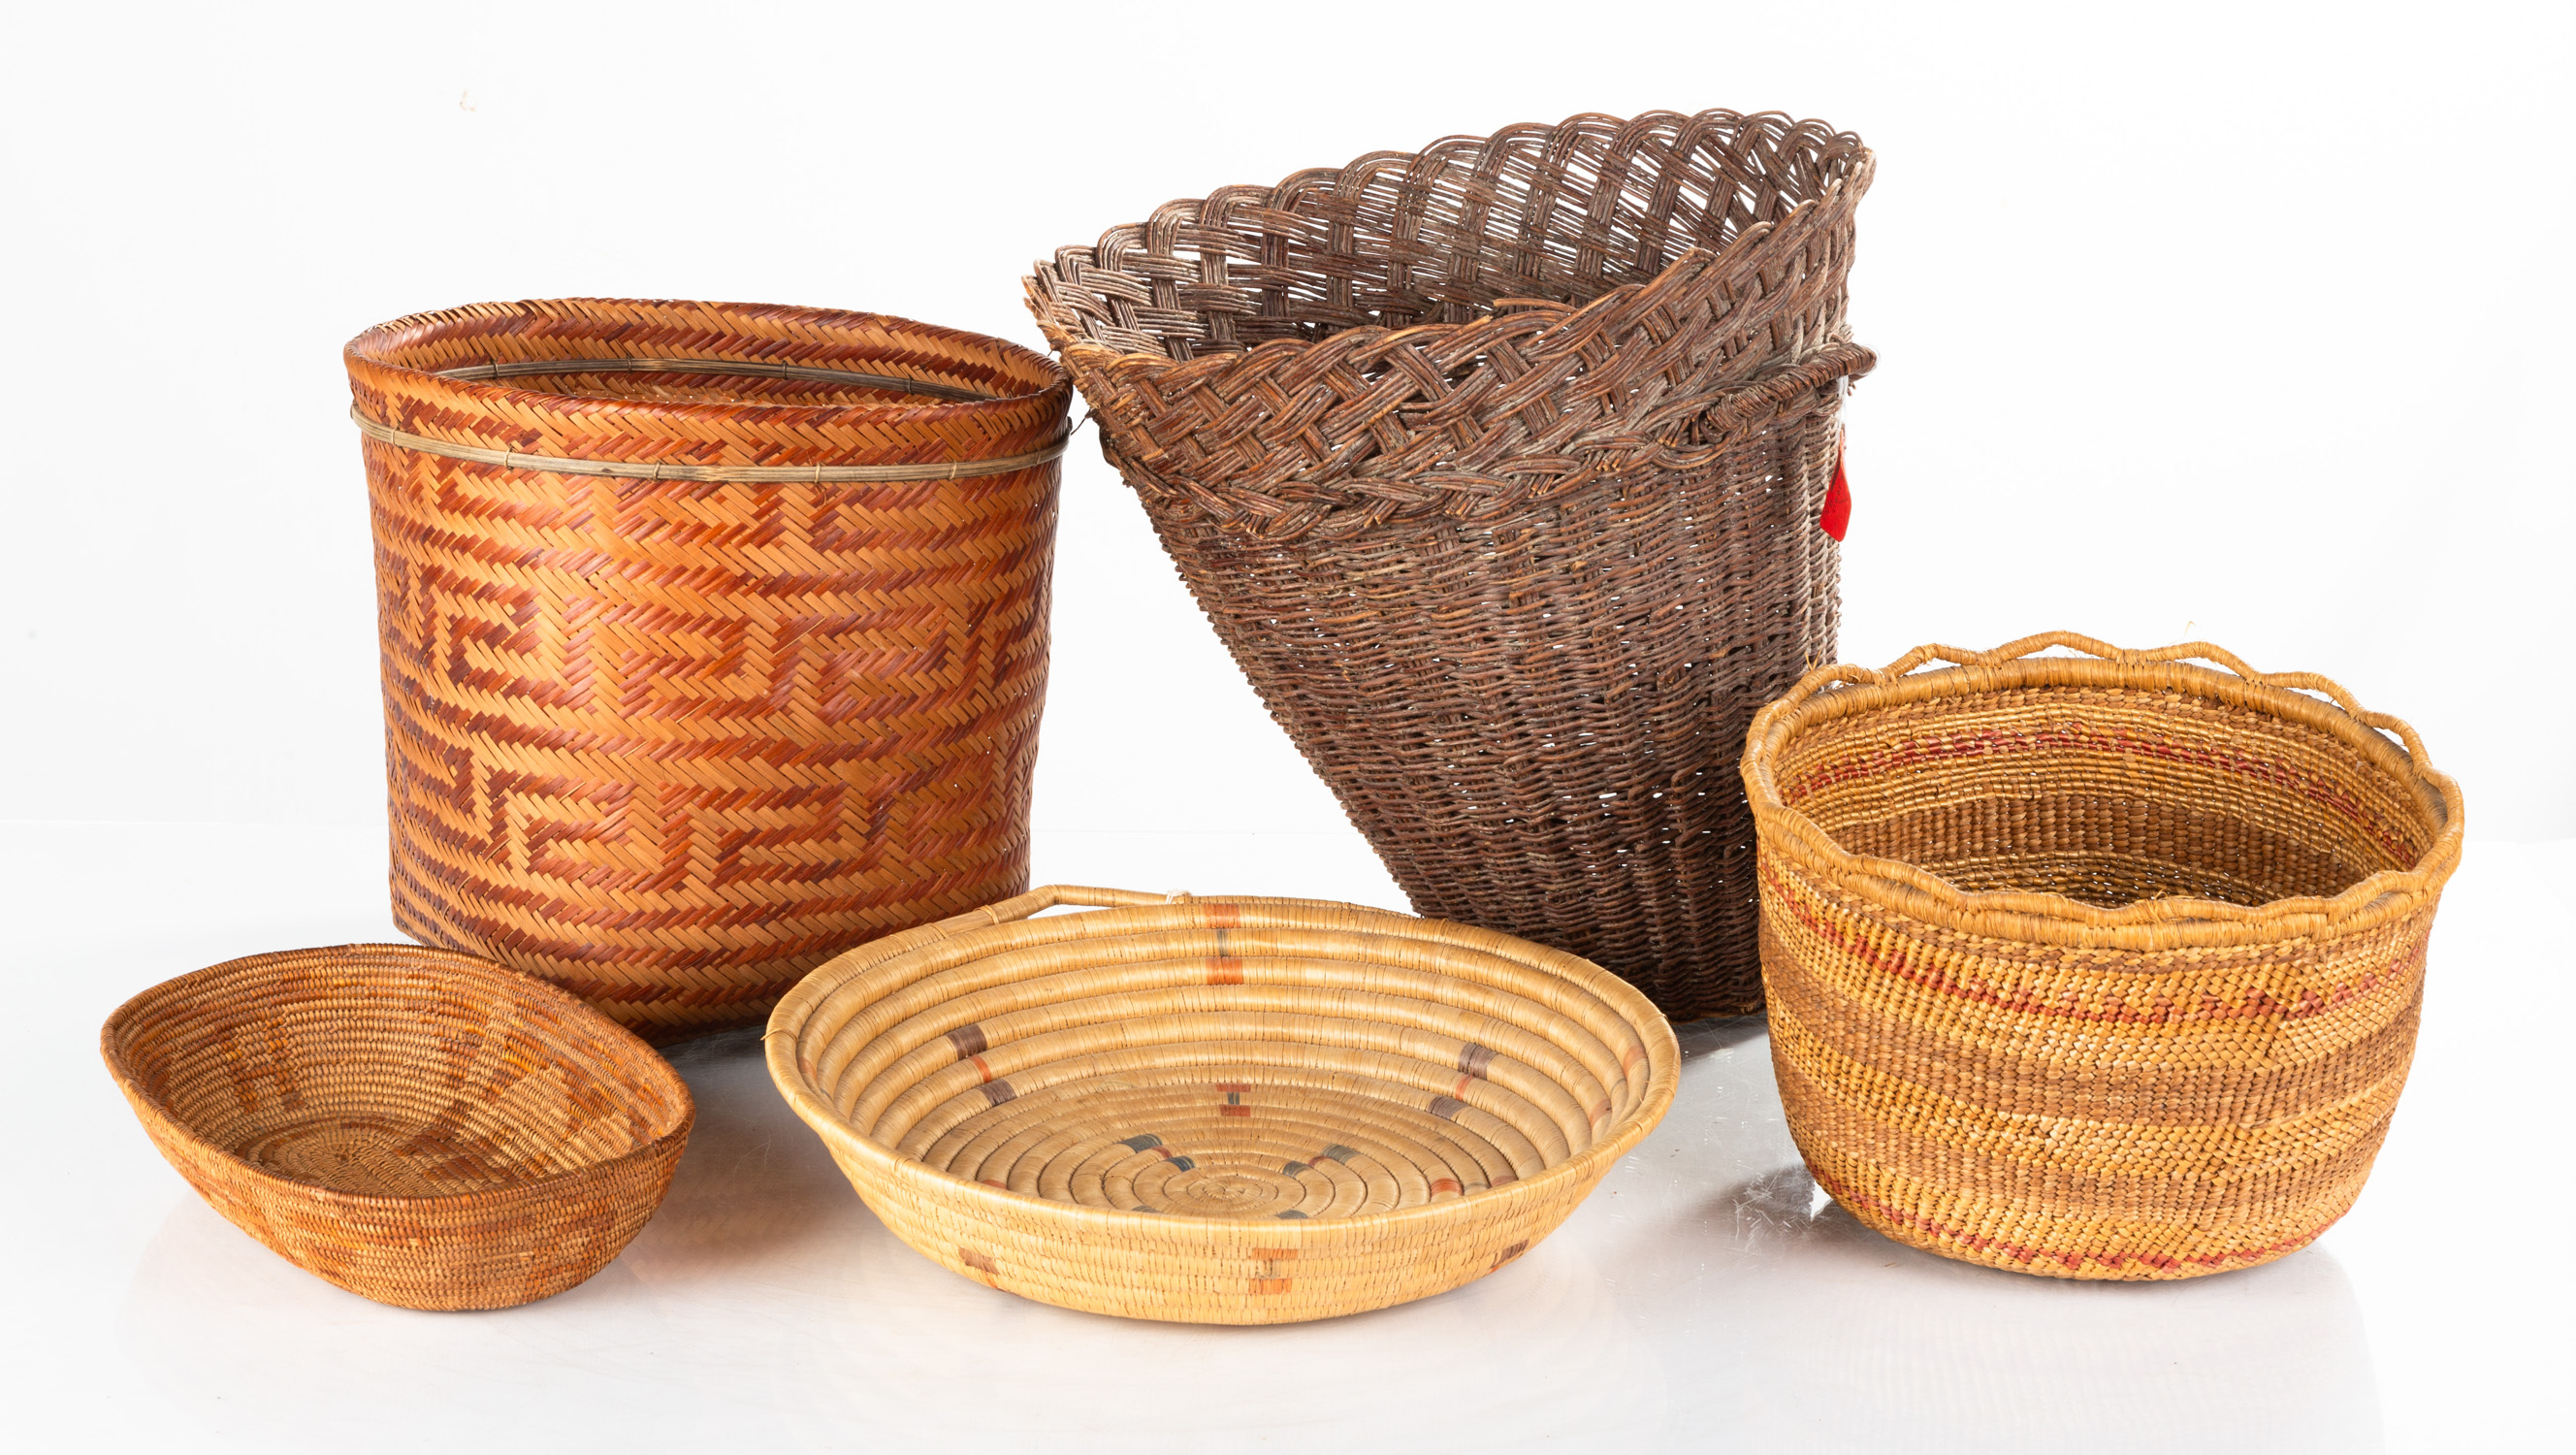 GROUP OF NATIVE AMERICAN BASKETS Including